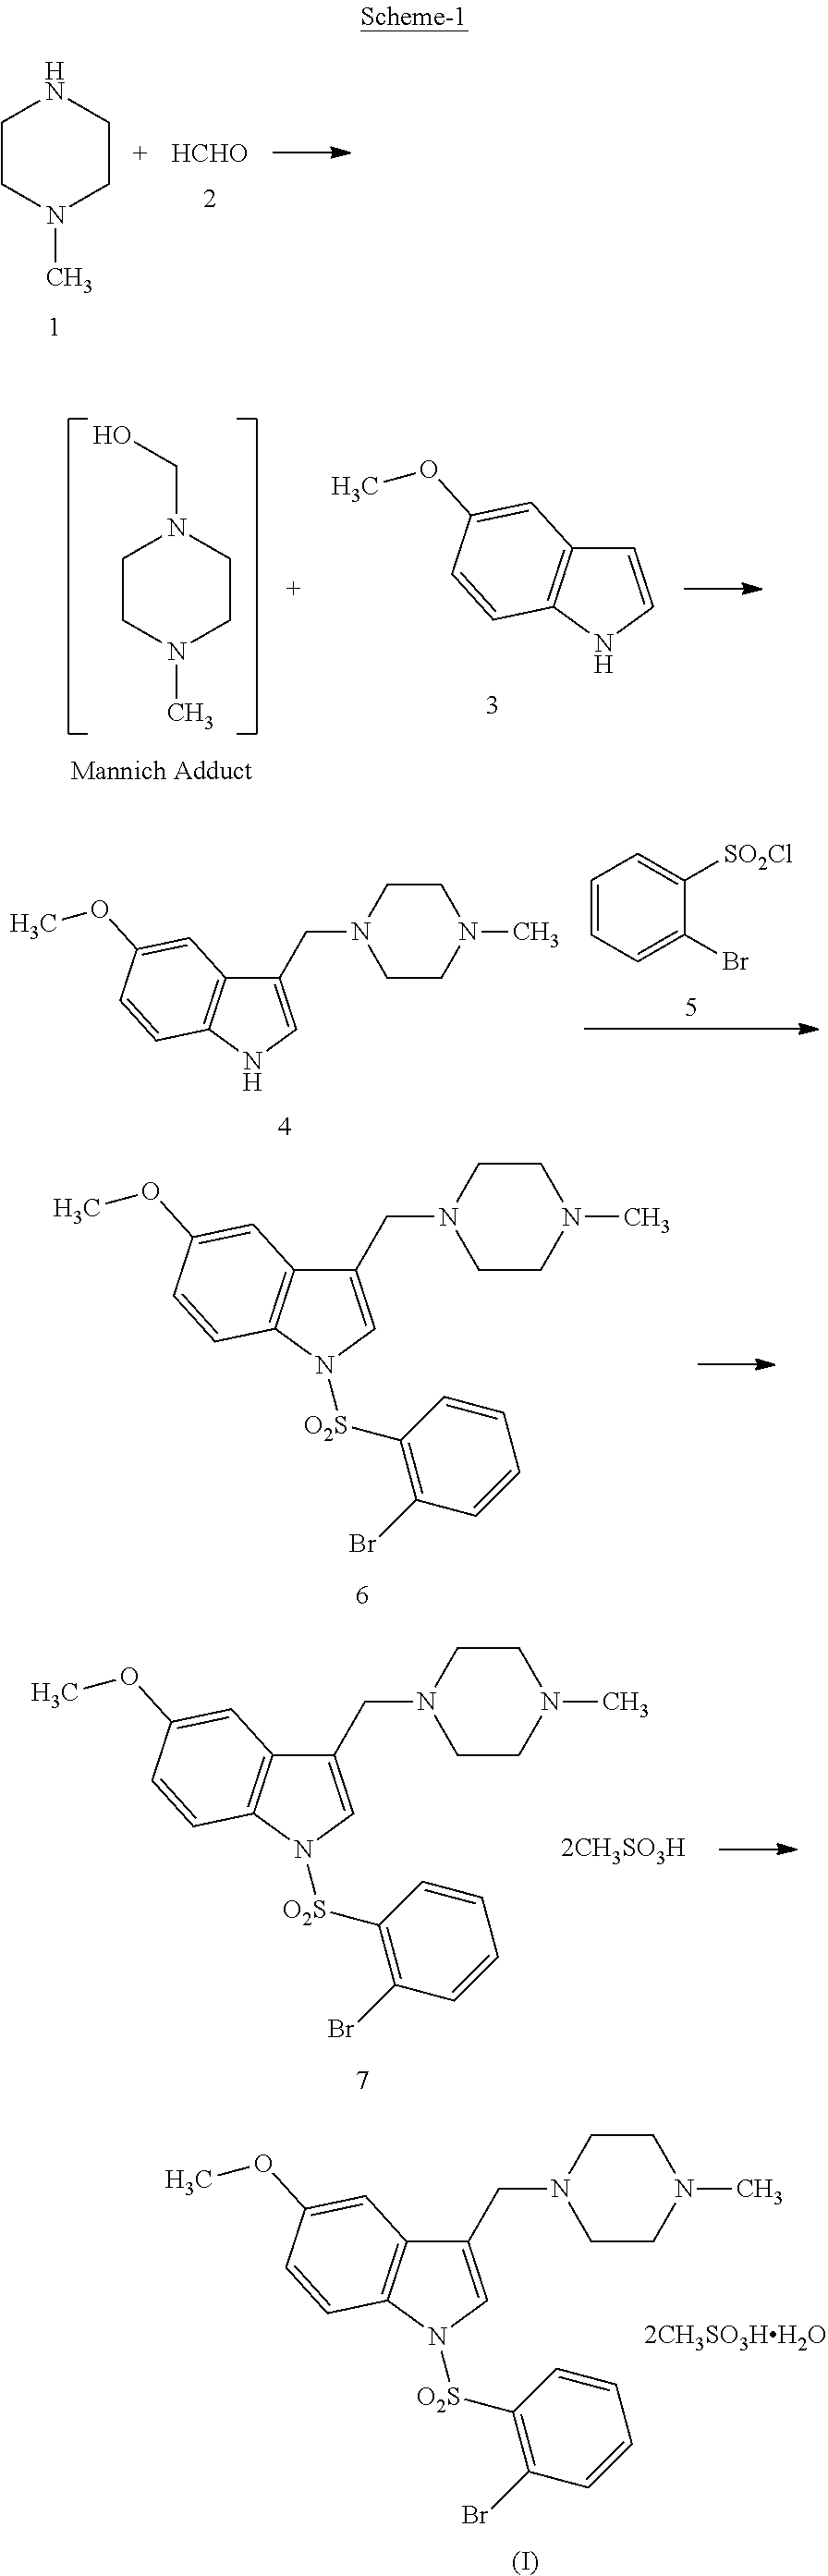 Process for large scale production of 1-[(2-bromophenyl)sulfonyl]-5-methoxy-3-[(4-methyl-1-piperazinyl)methyl]-1H-indole dimesylate monohydrate